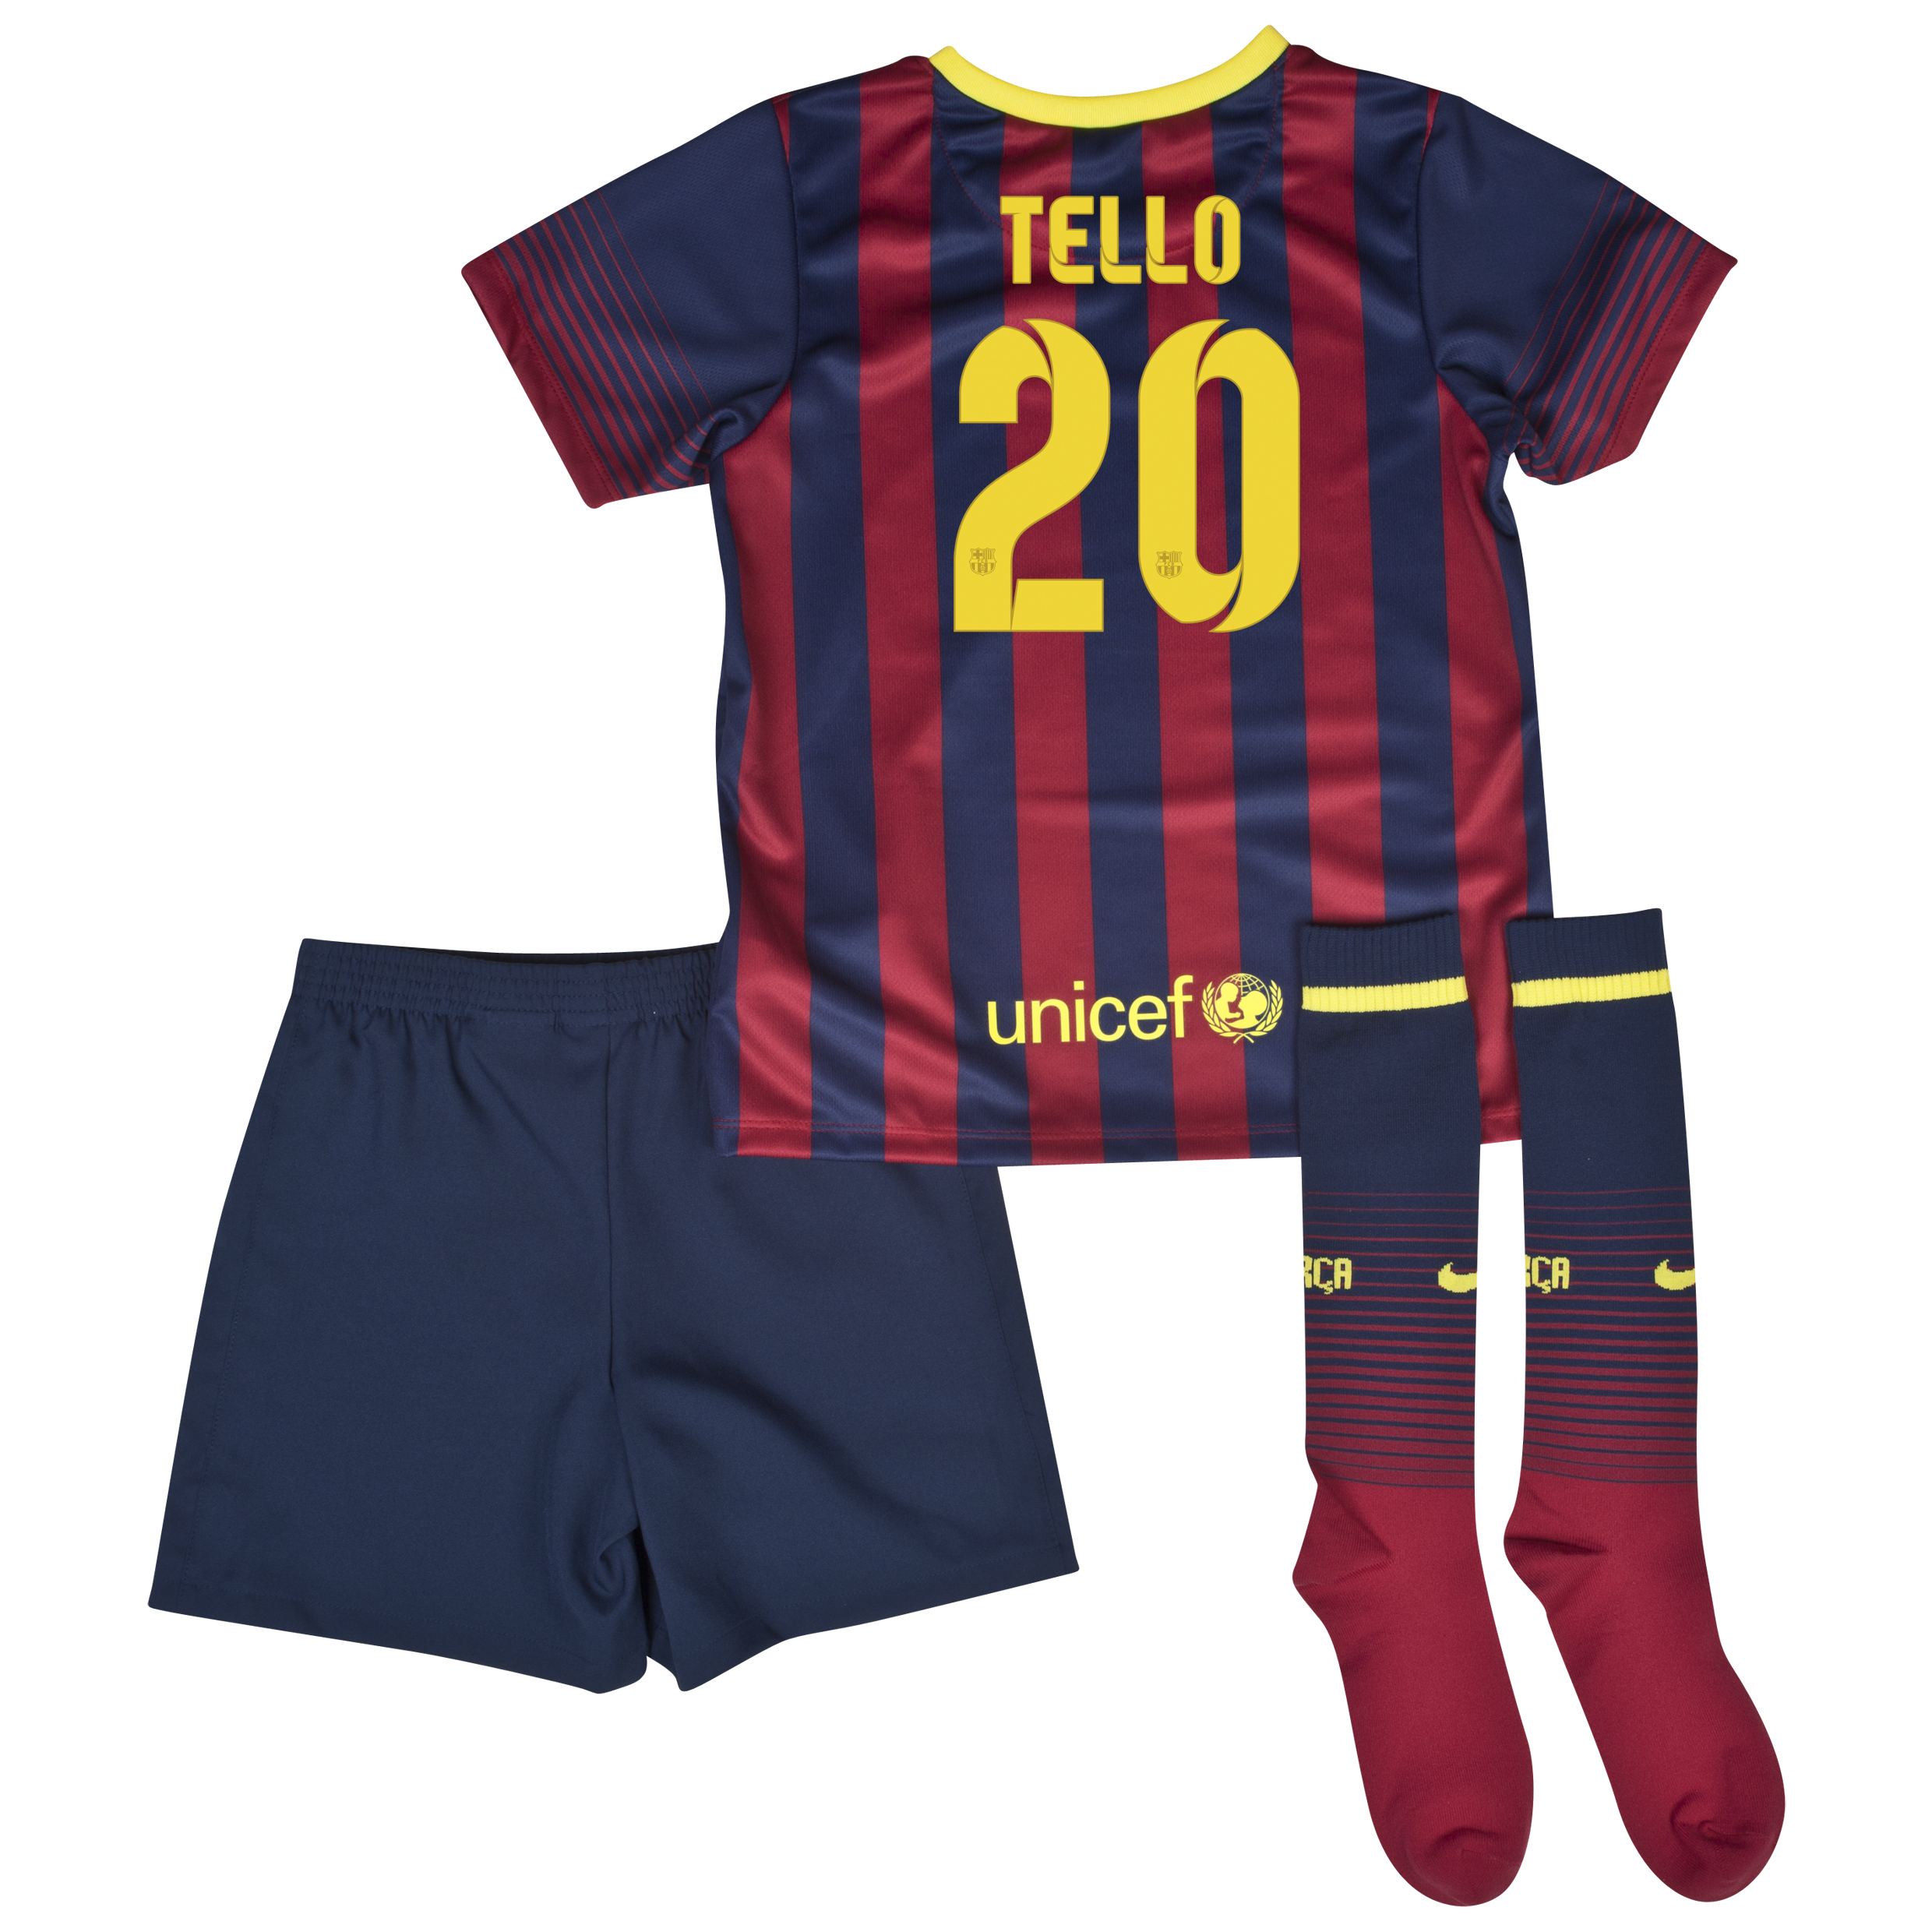 Barcelona Home Kit 2013/14 - Little Boys with Tello 20 printing